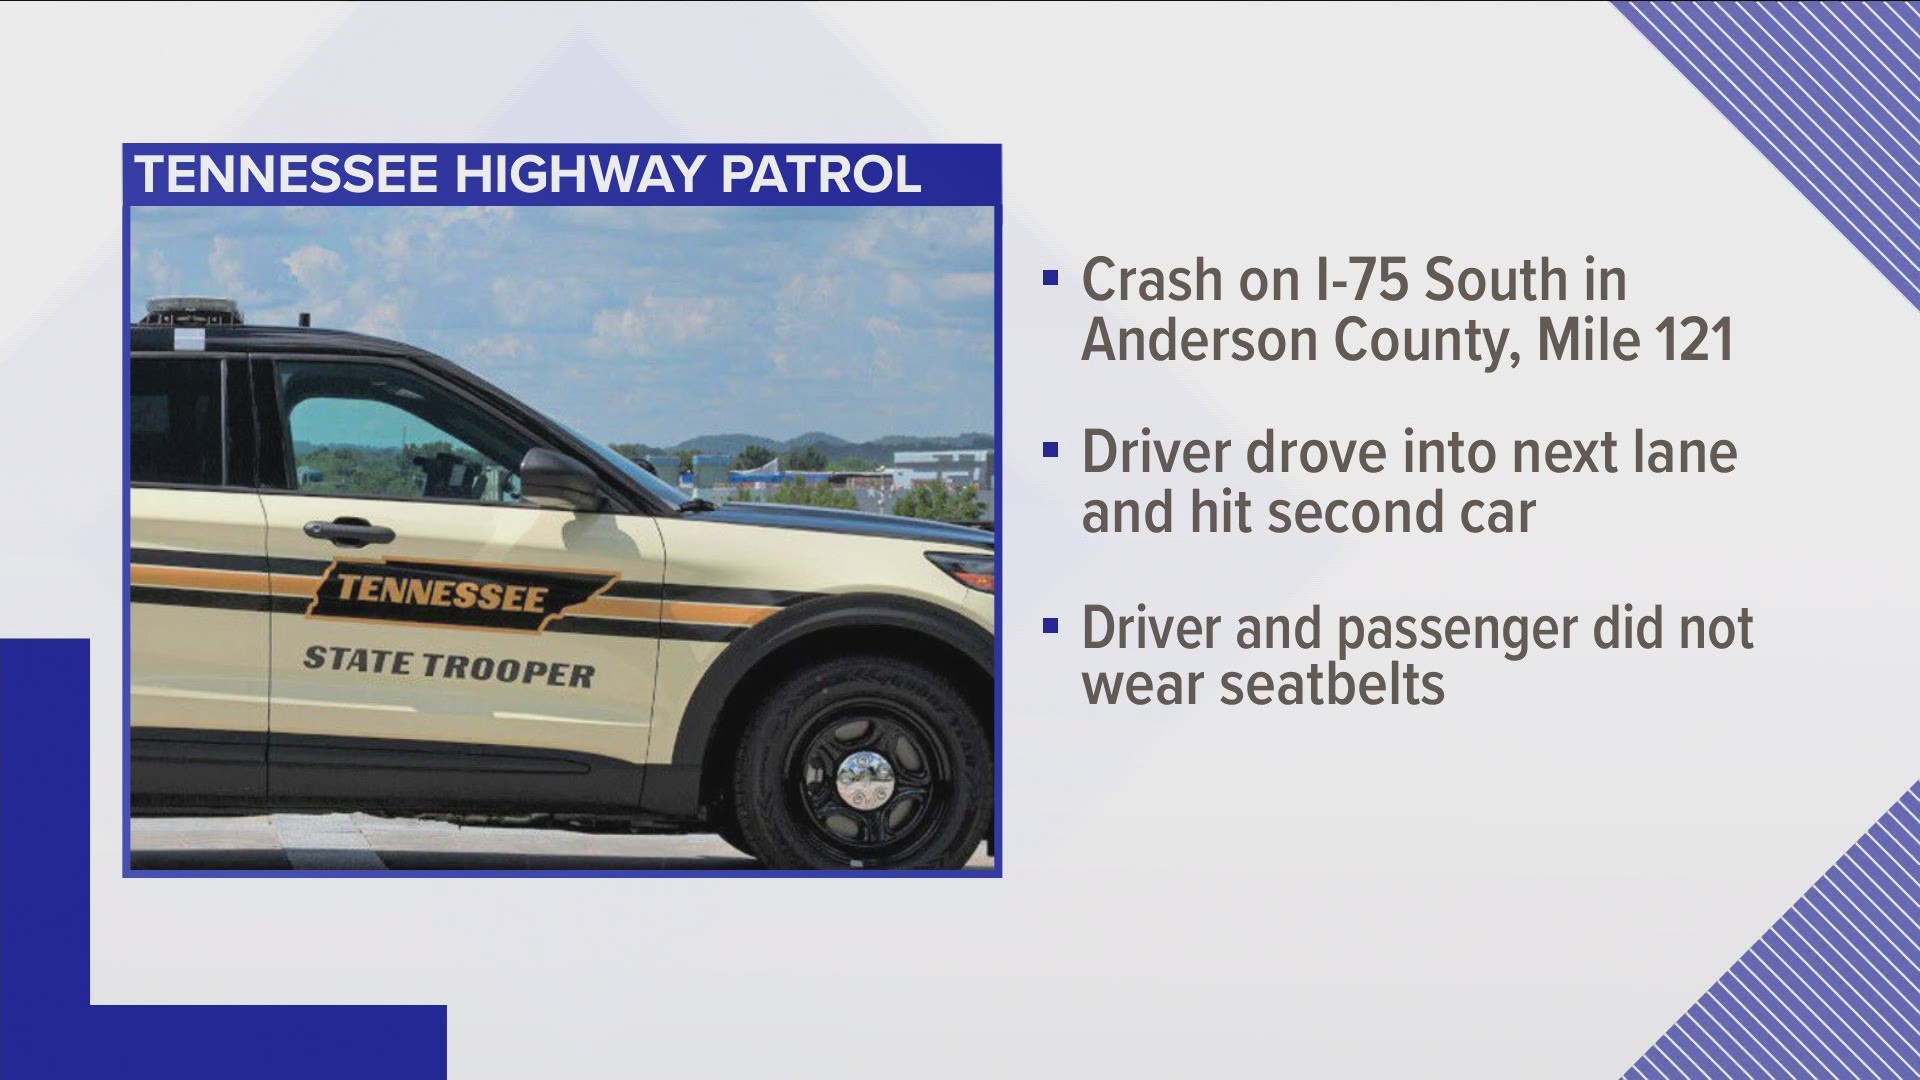 THP said a driver drove into the next lane while on the highway and hit a second car.